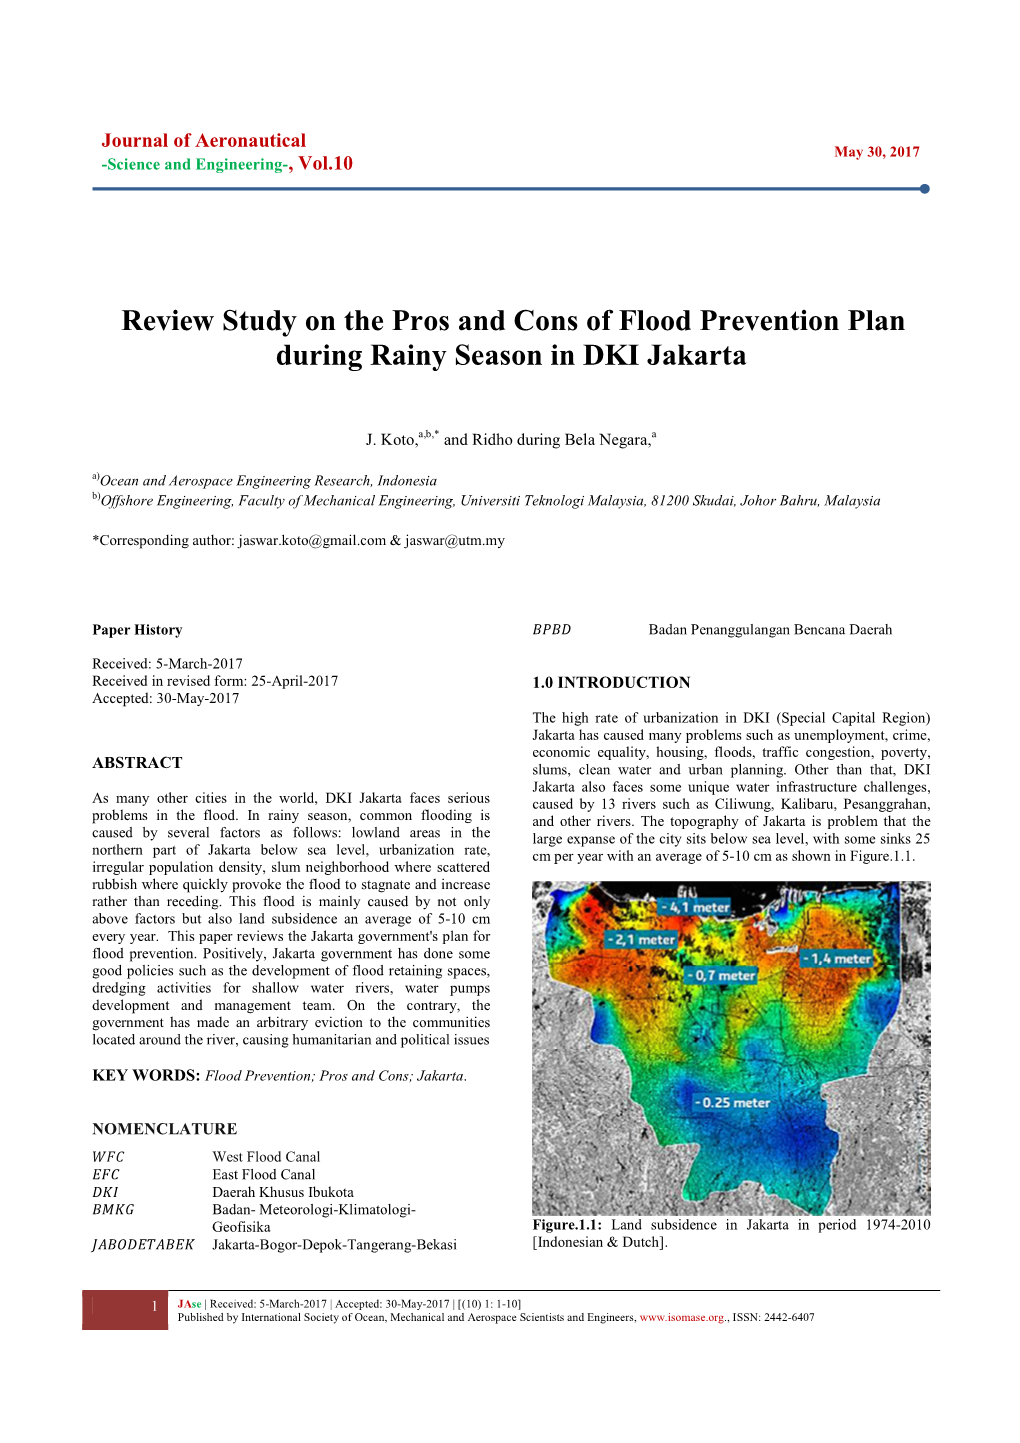 Review Study on the Pros and Cons of Flood Prevention Plan During Rainy Season in DKI Jakarta